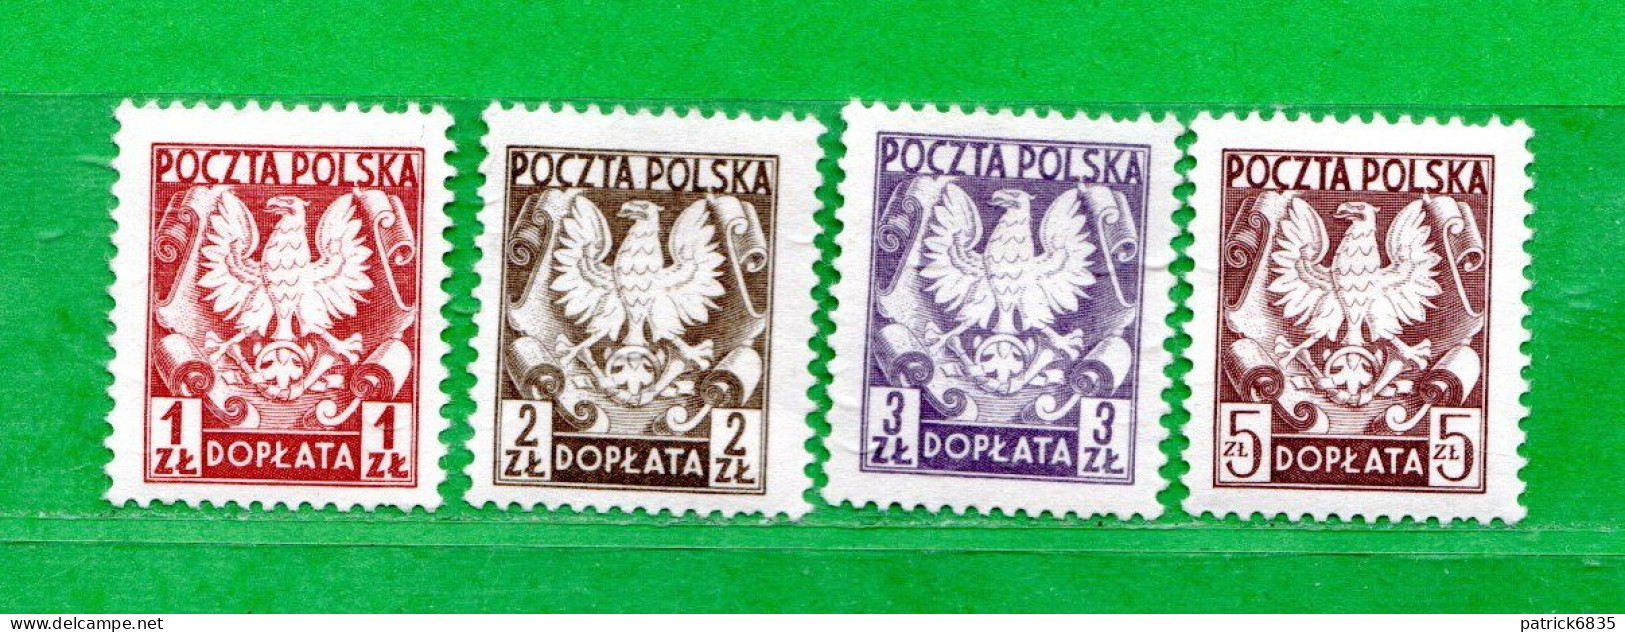 (N) POLONIA ** - SEGNATASSE - TAXE - 1980 -  Yv. 146 à 149 .  MNH** Come Scansione - Taxe